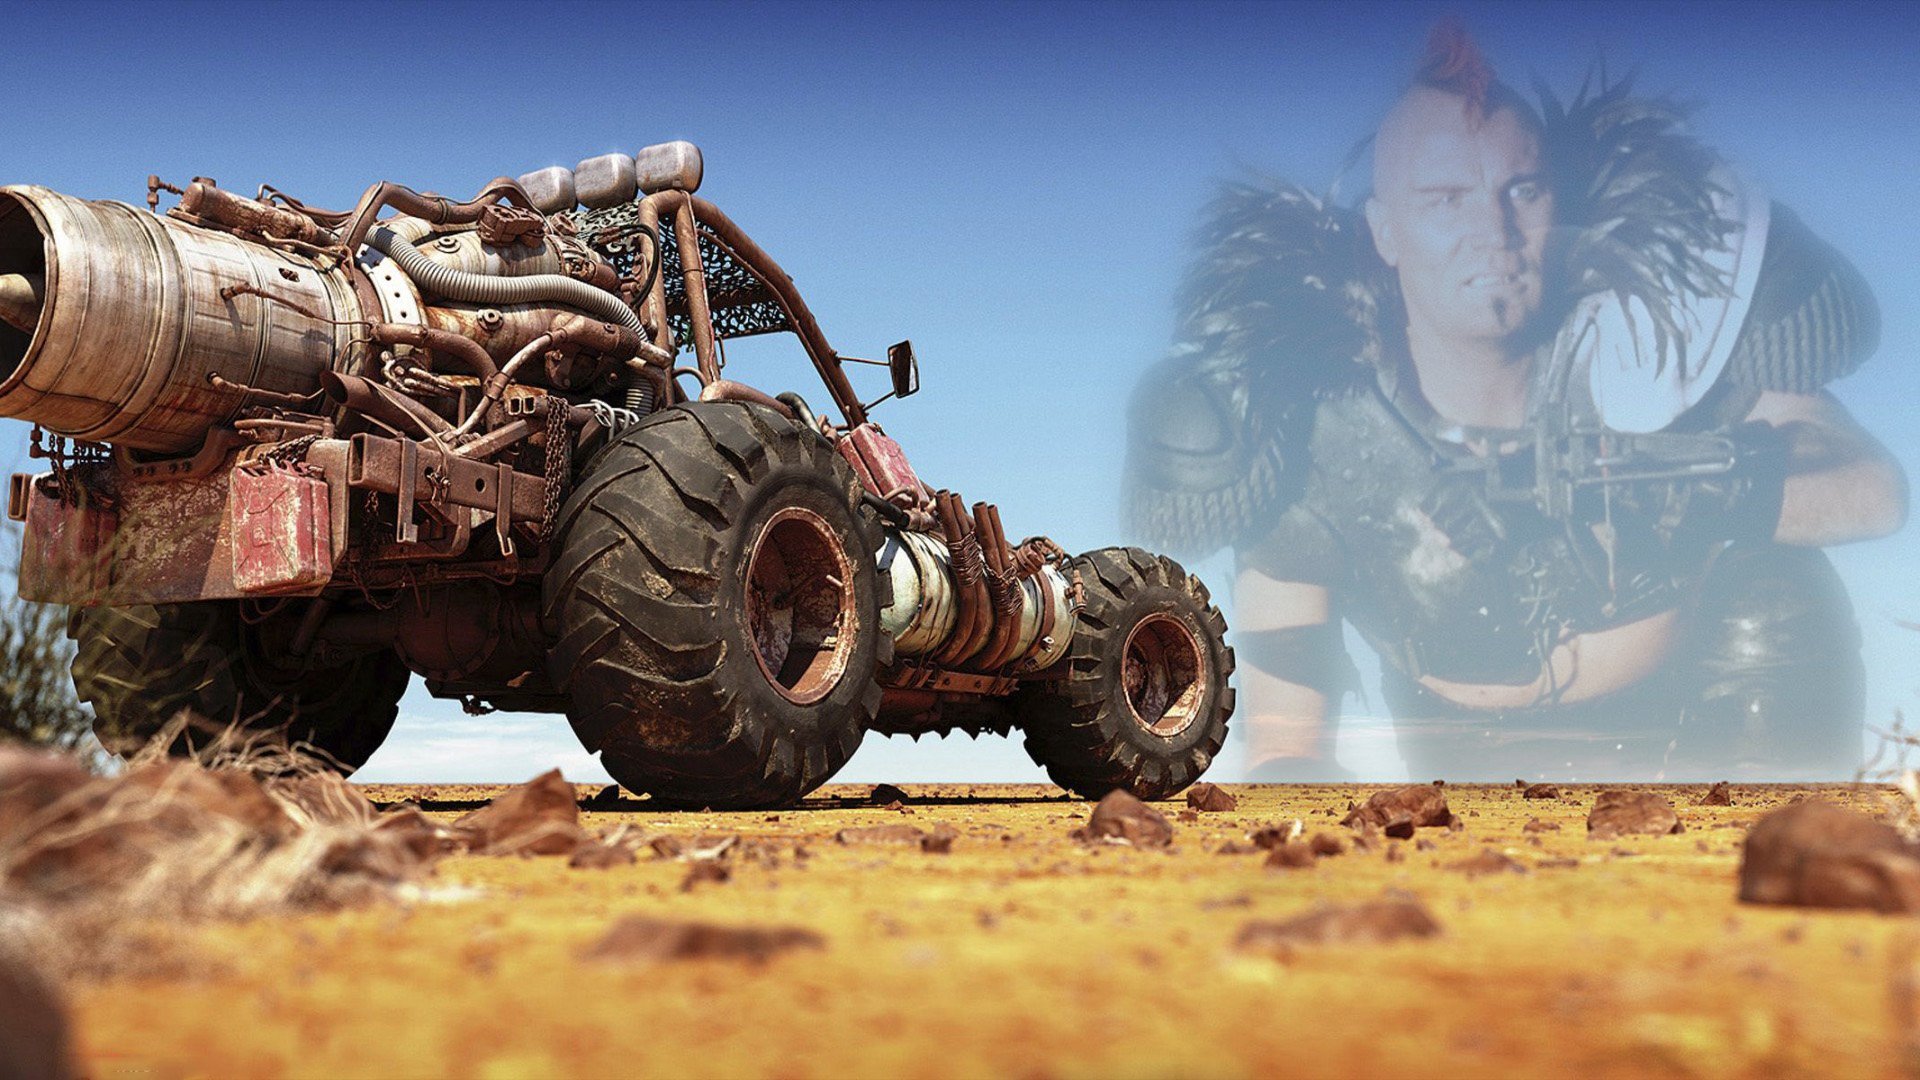 mad max images road warrior